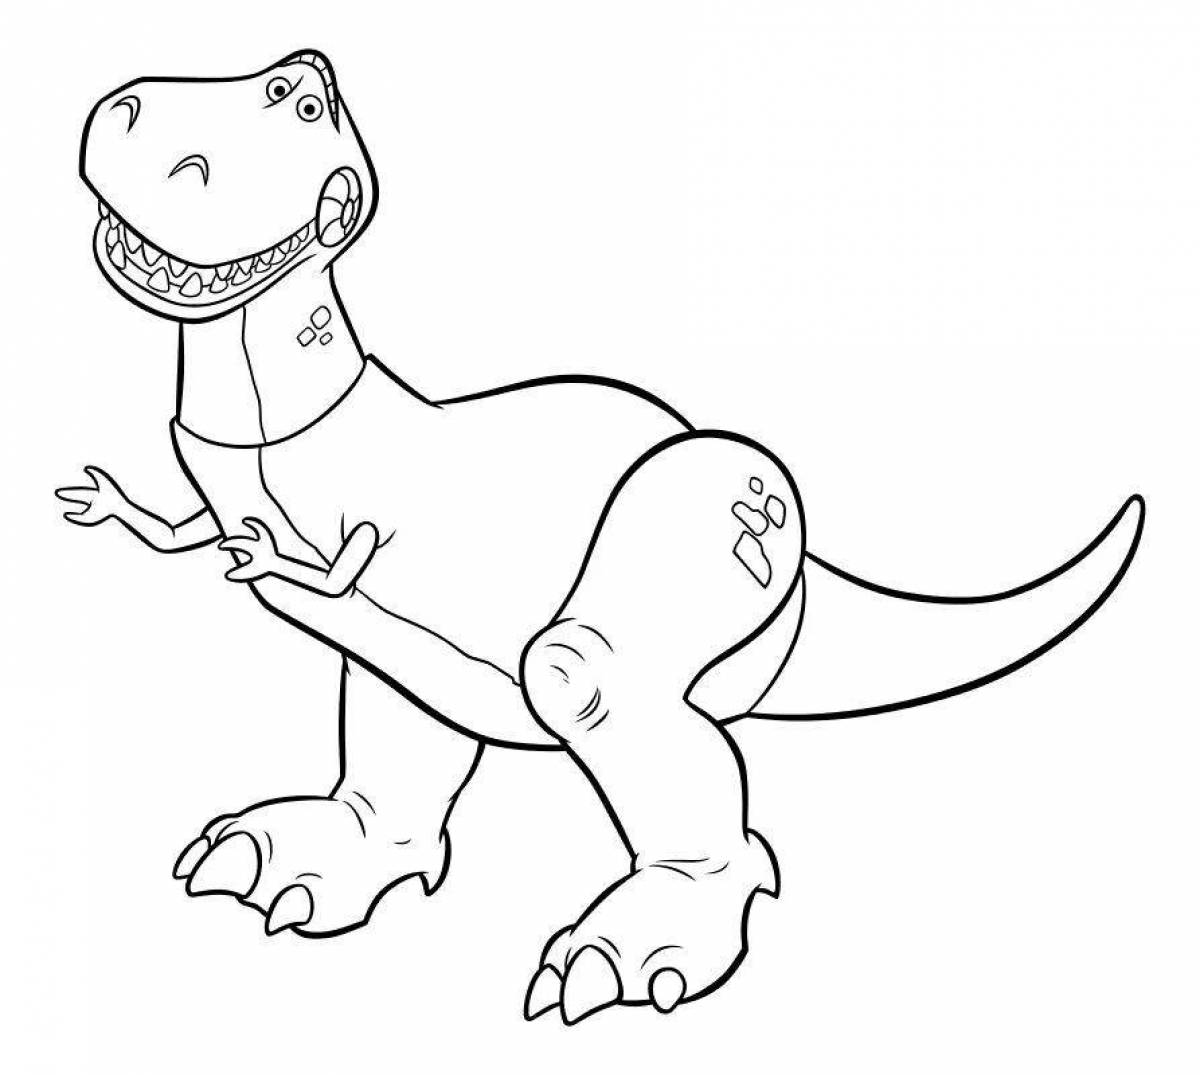 Coloring page brave turbosaurs